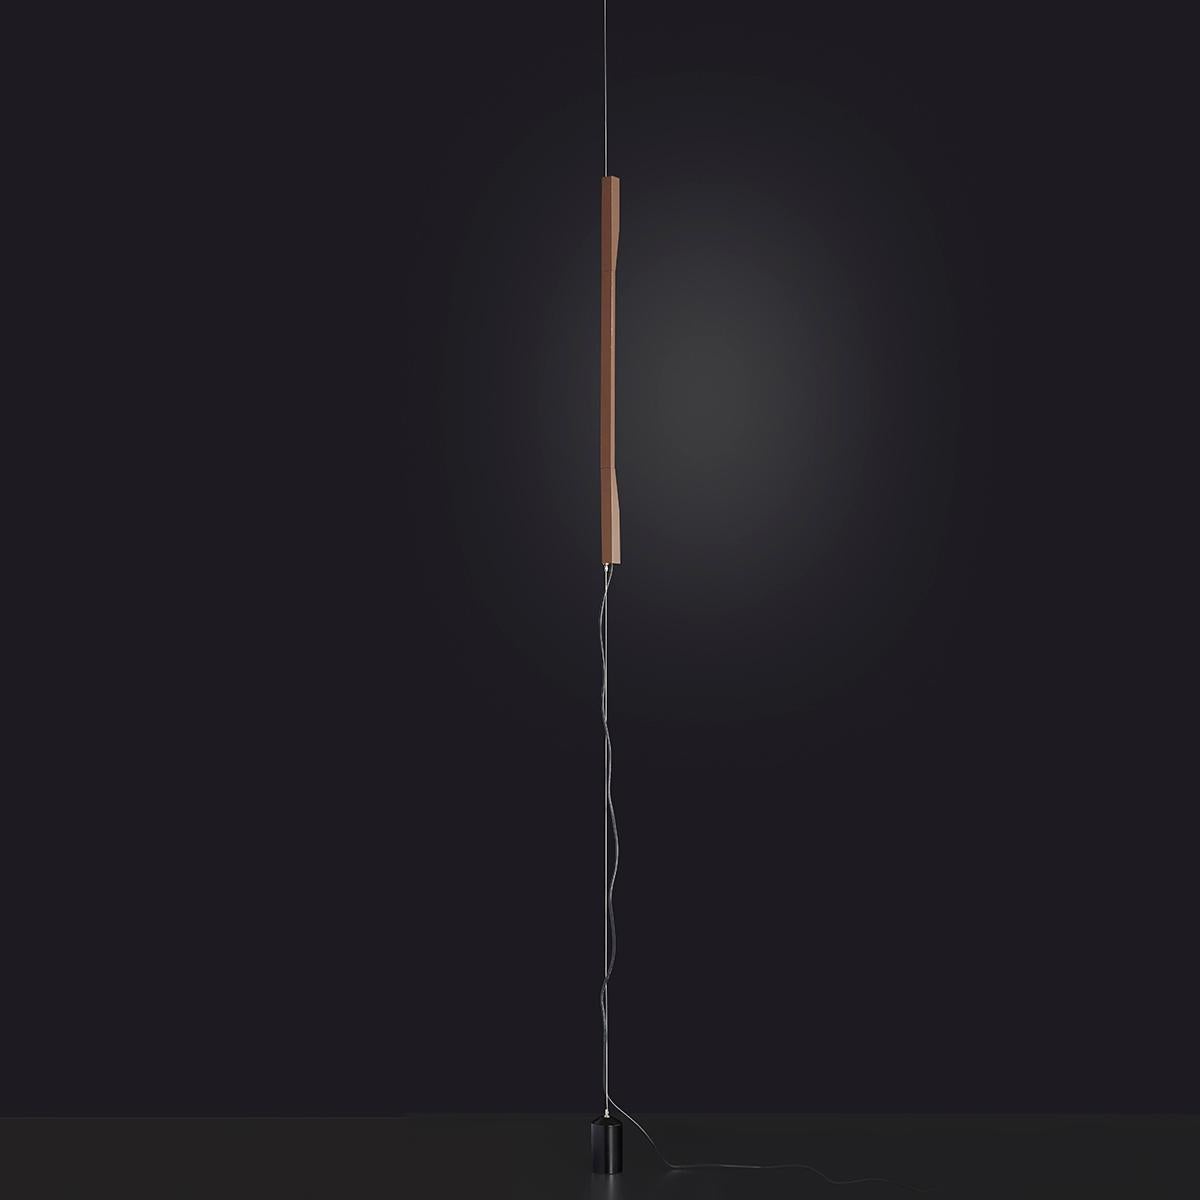 Suspension lamp 'Ilo' designed by David Lopez Quincoce in 2019.
Adjustable led lamp giving indirect light. Vertical sliding of the satin bronze anodized aluminum rod on a ceiling-to-floor steel cable. Matt black painted counterweight. Manufactured